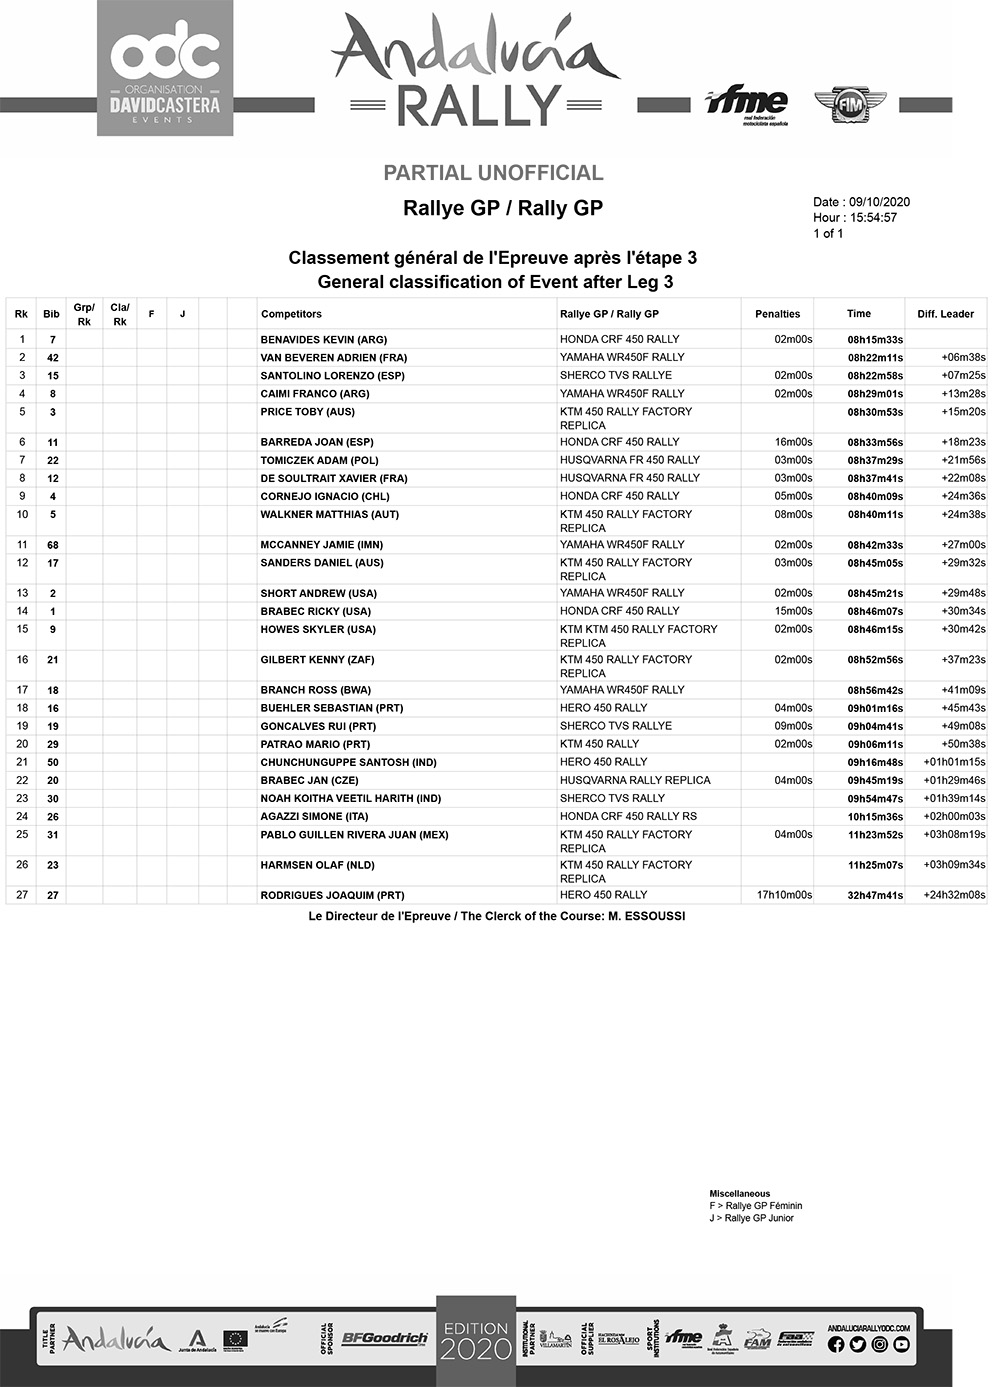 classification-after-leg-3-rally-gp